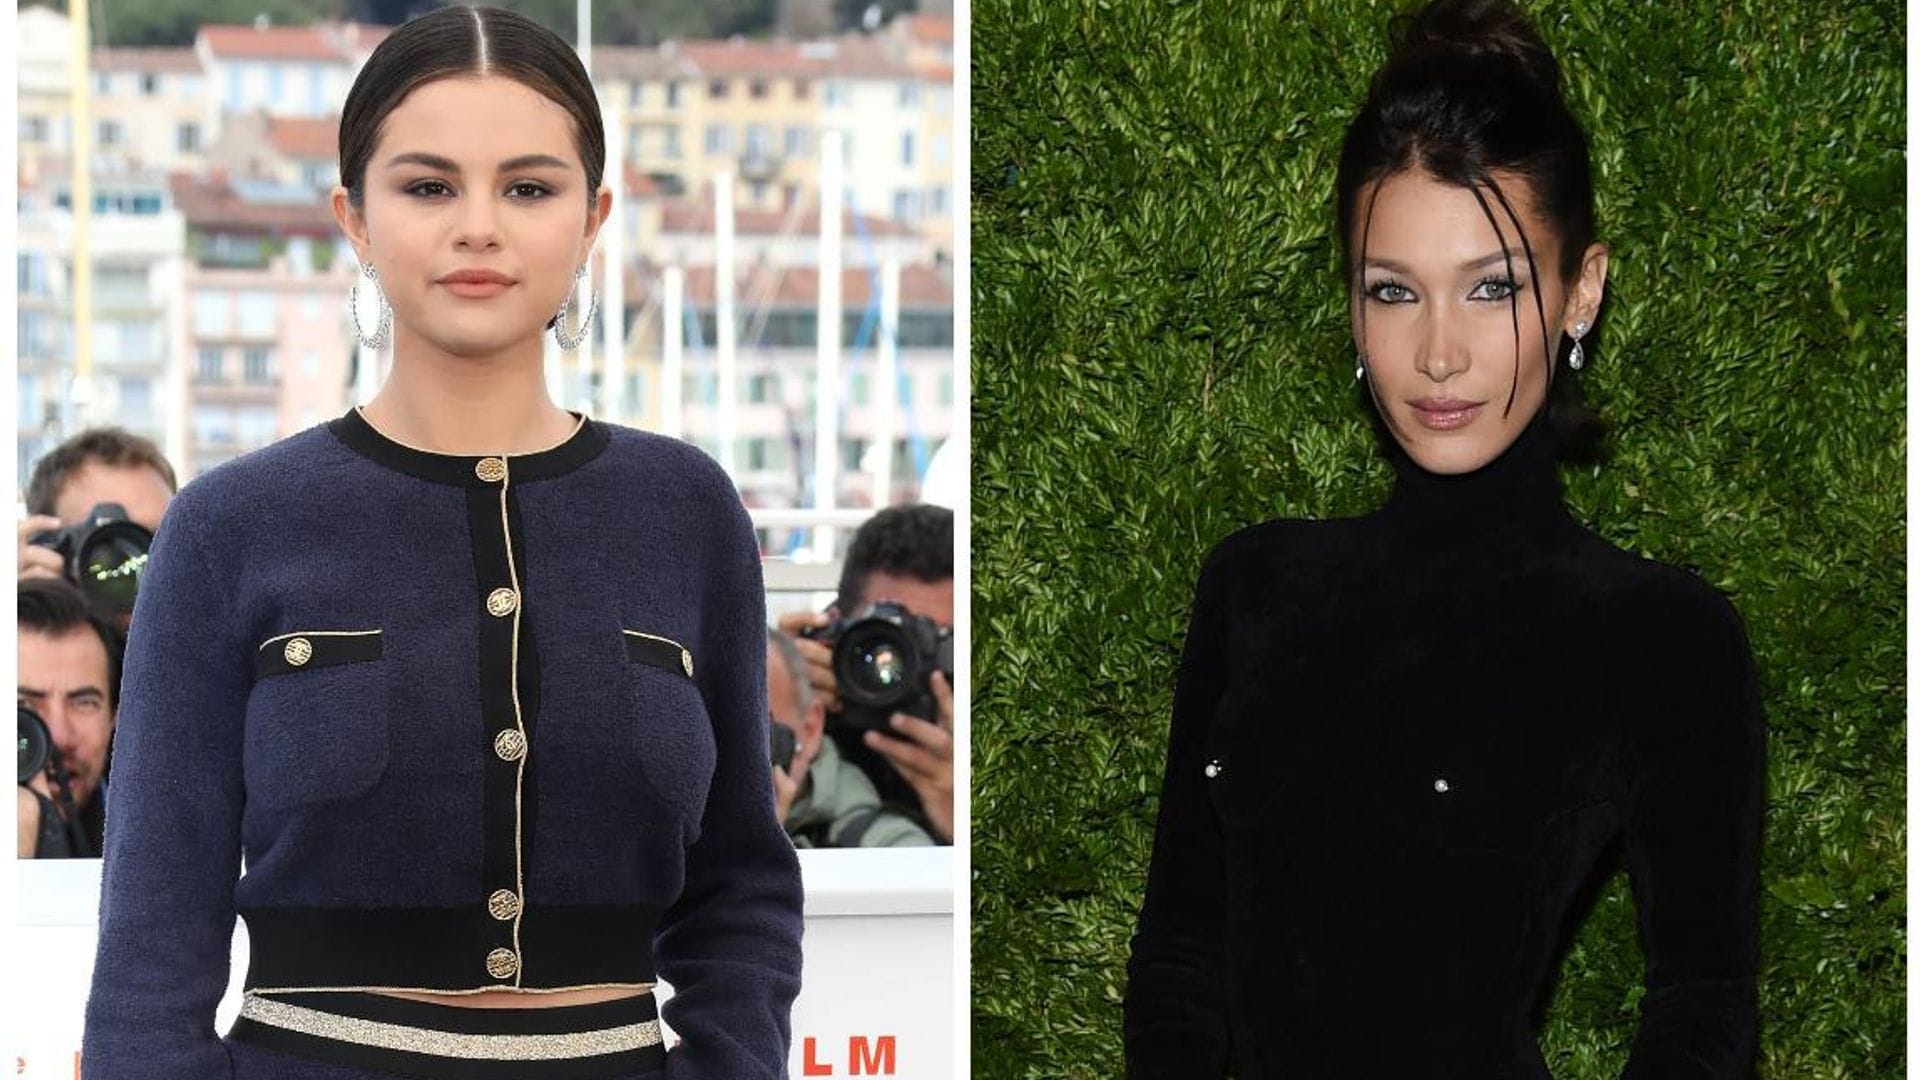 Selena Gomez re-follows Bella Hadid after both end relationship with The Weeknd